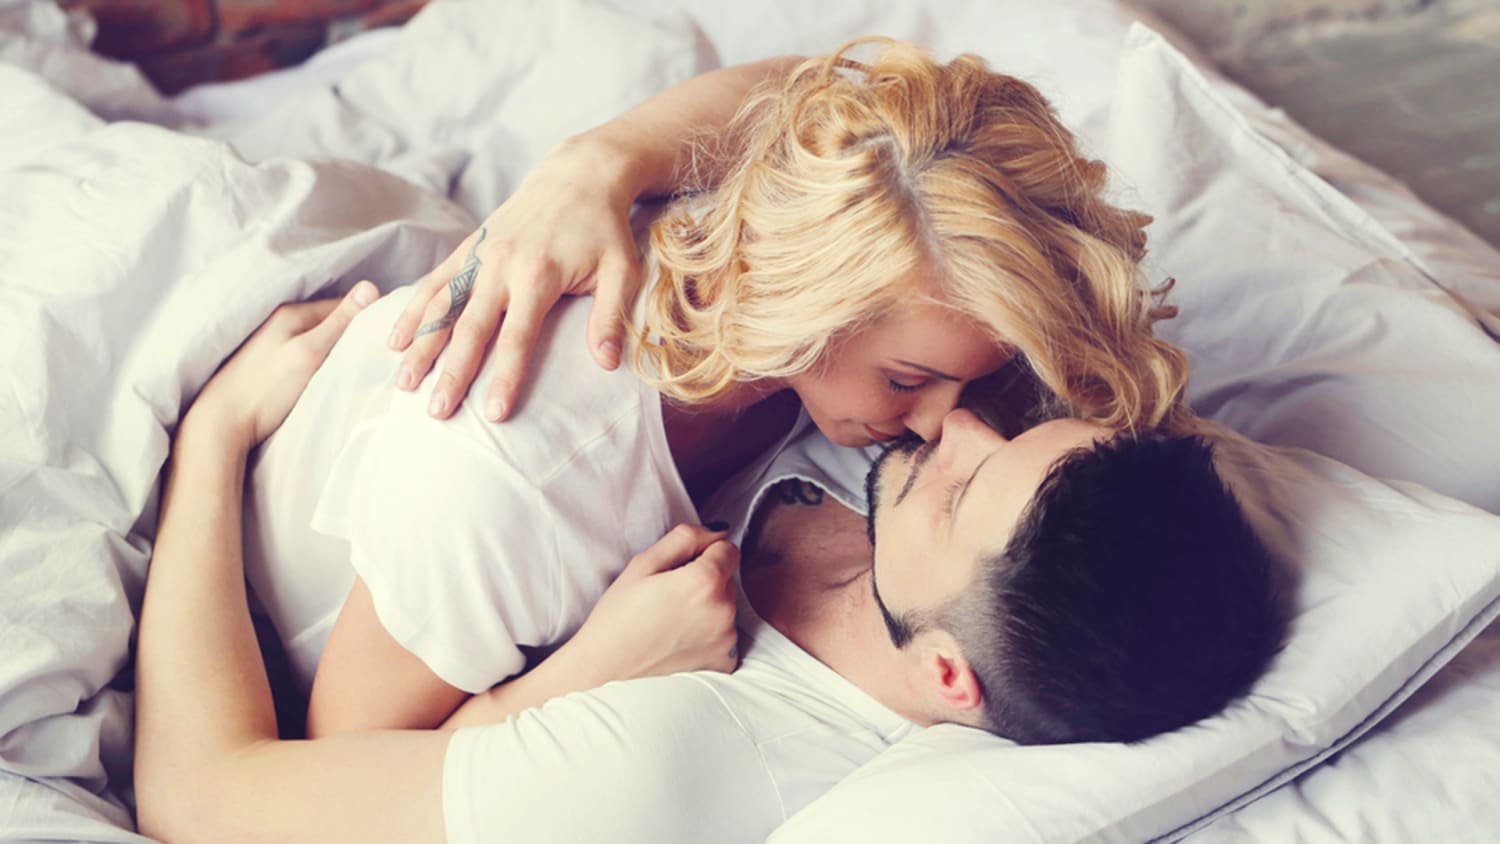 Romantic Slipping Sex Com - The biggest sex mistakes men and women make